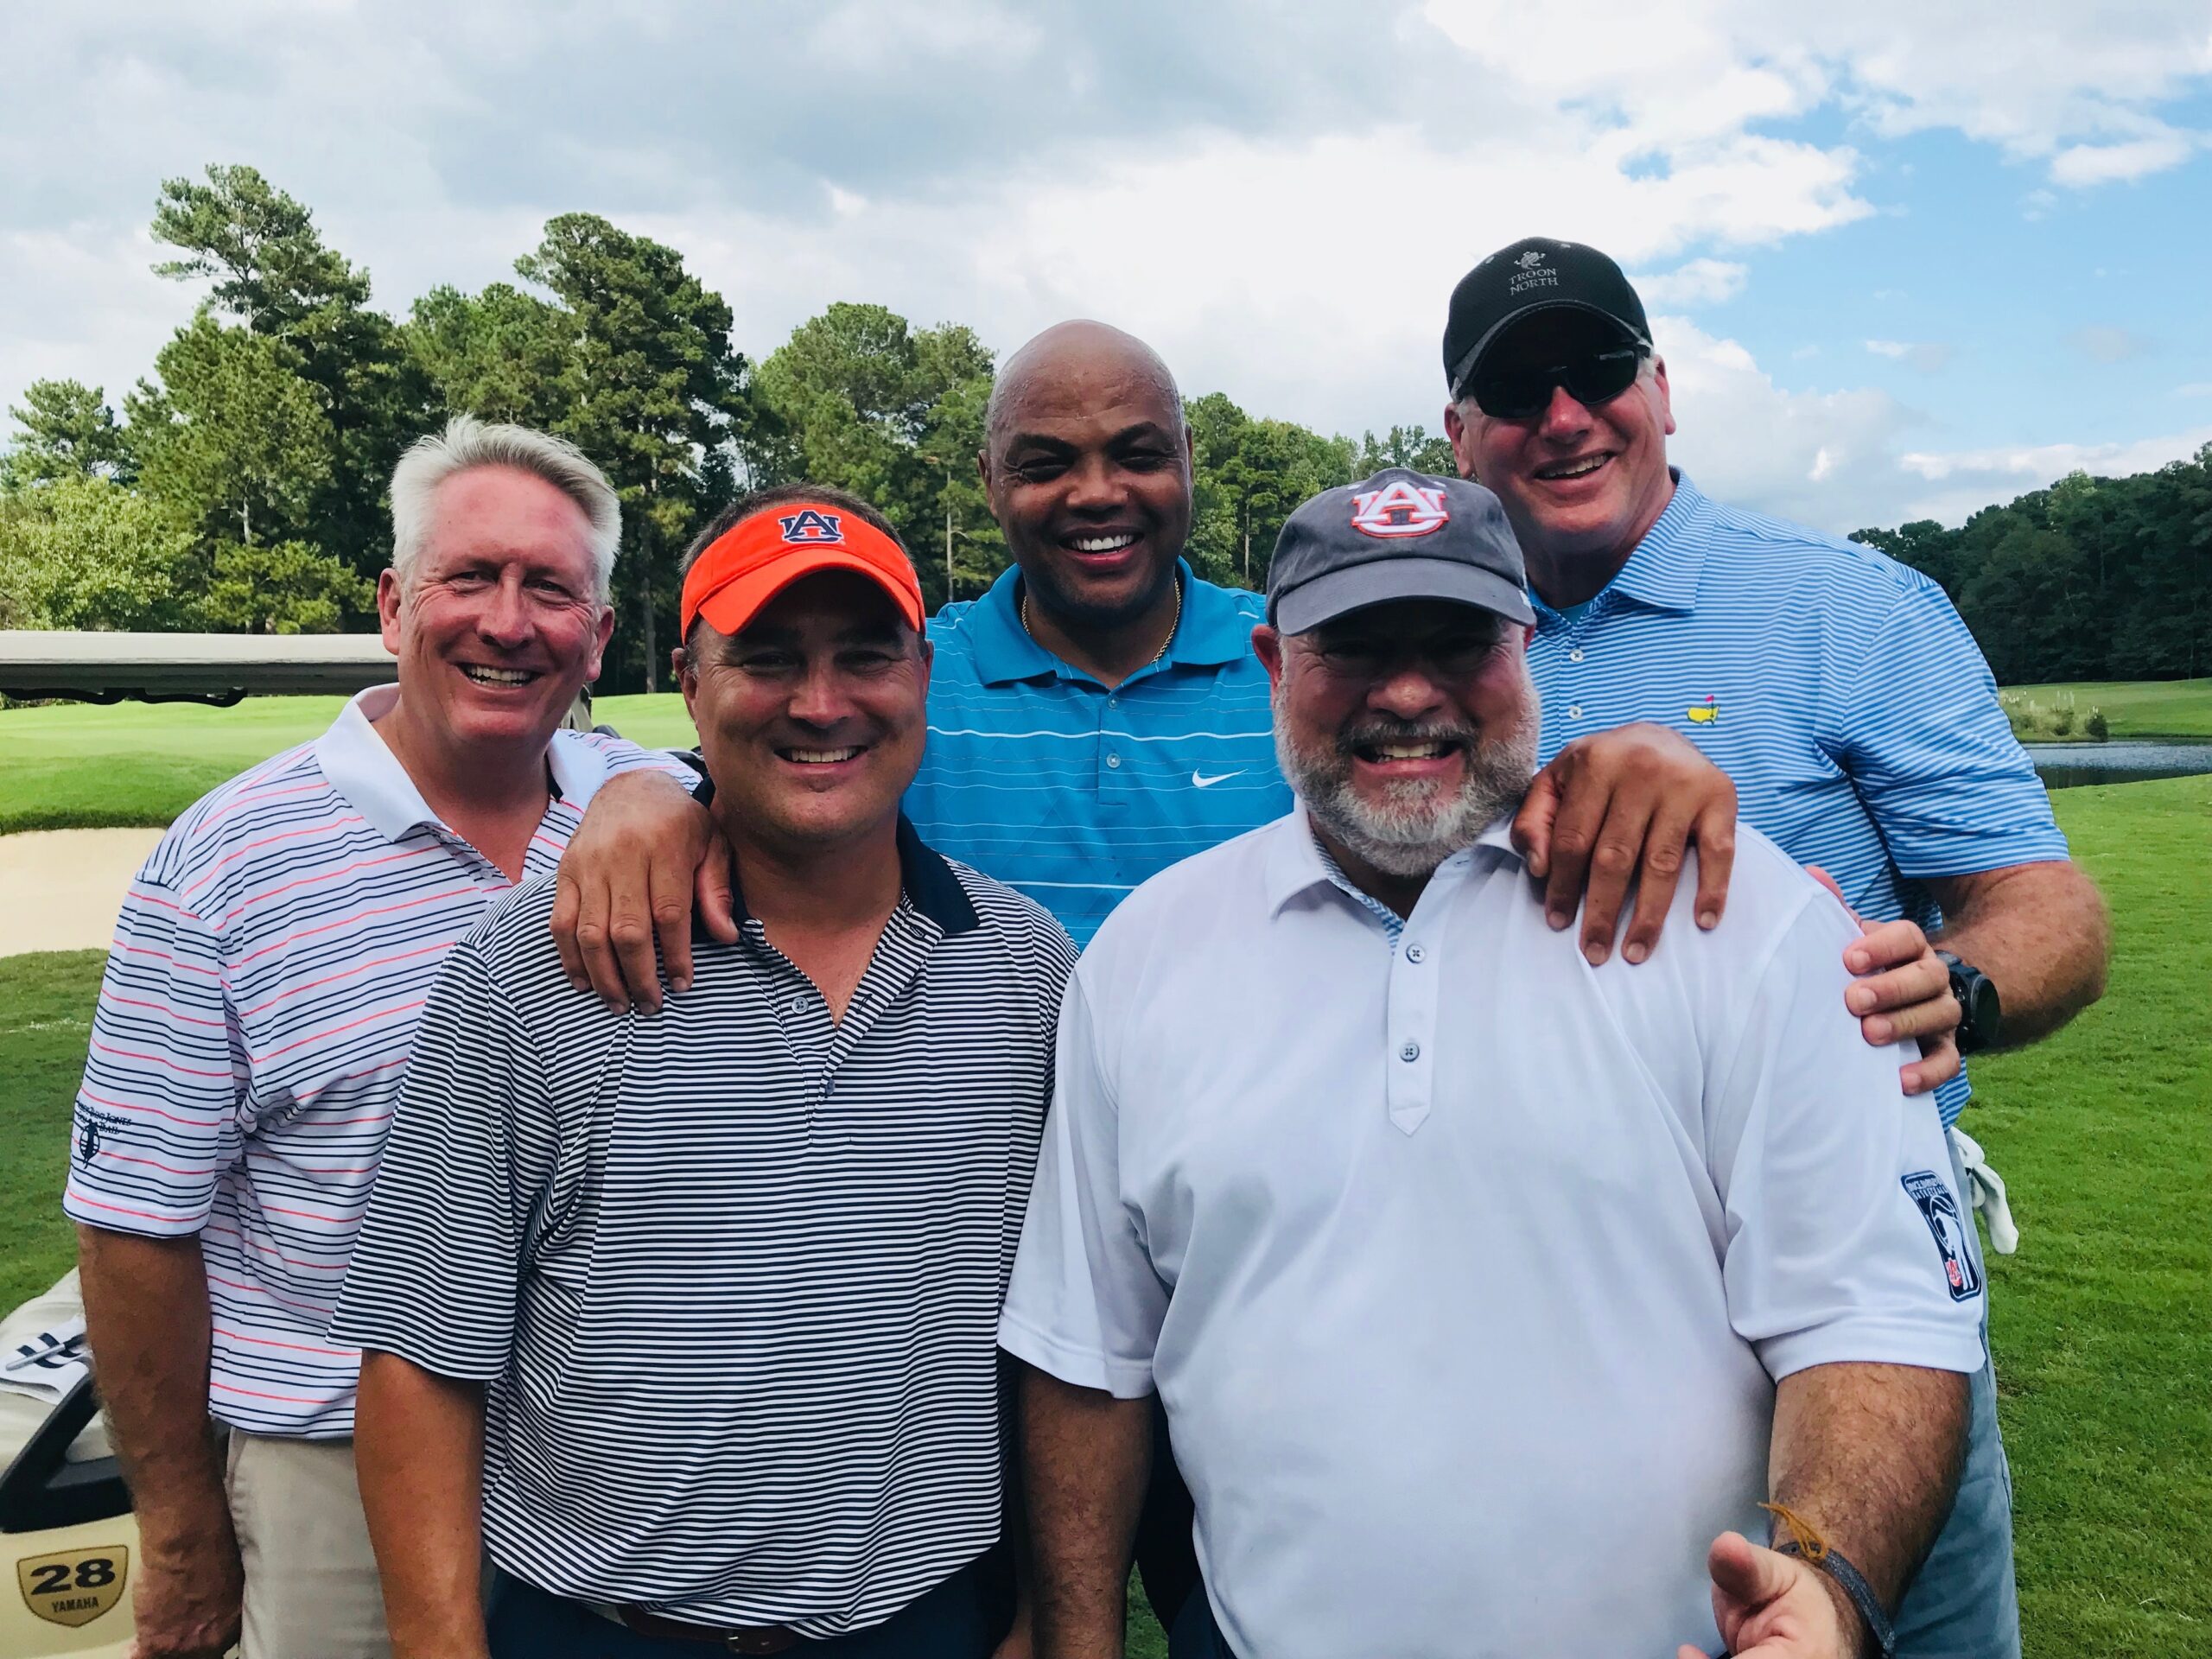 Gary Godfrey with Charles Barkley and friends